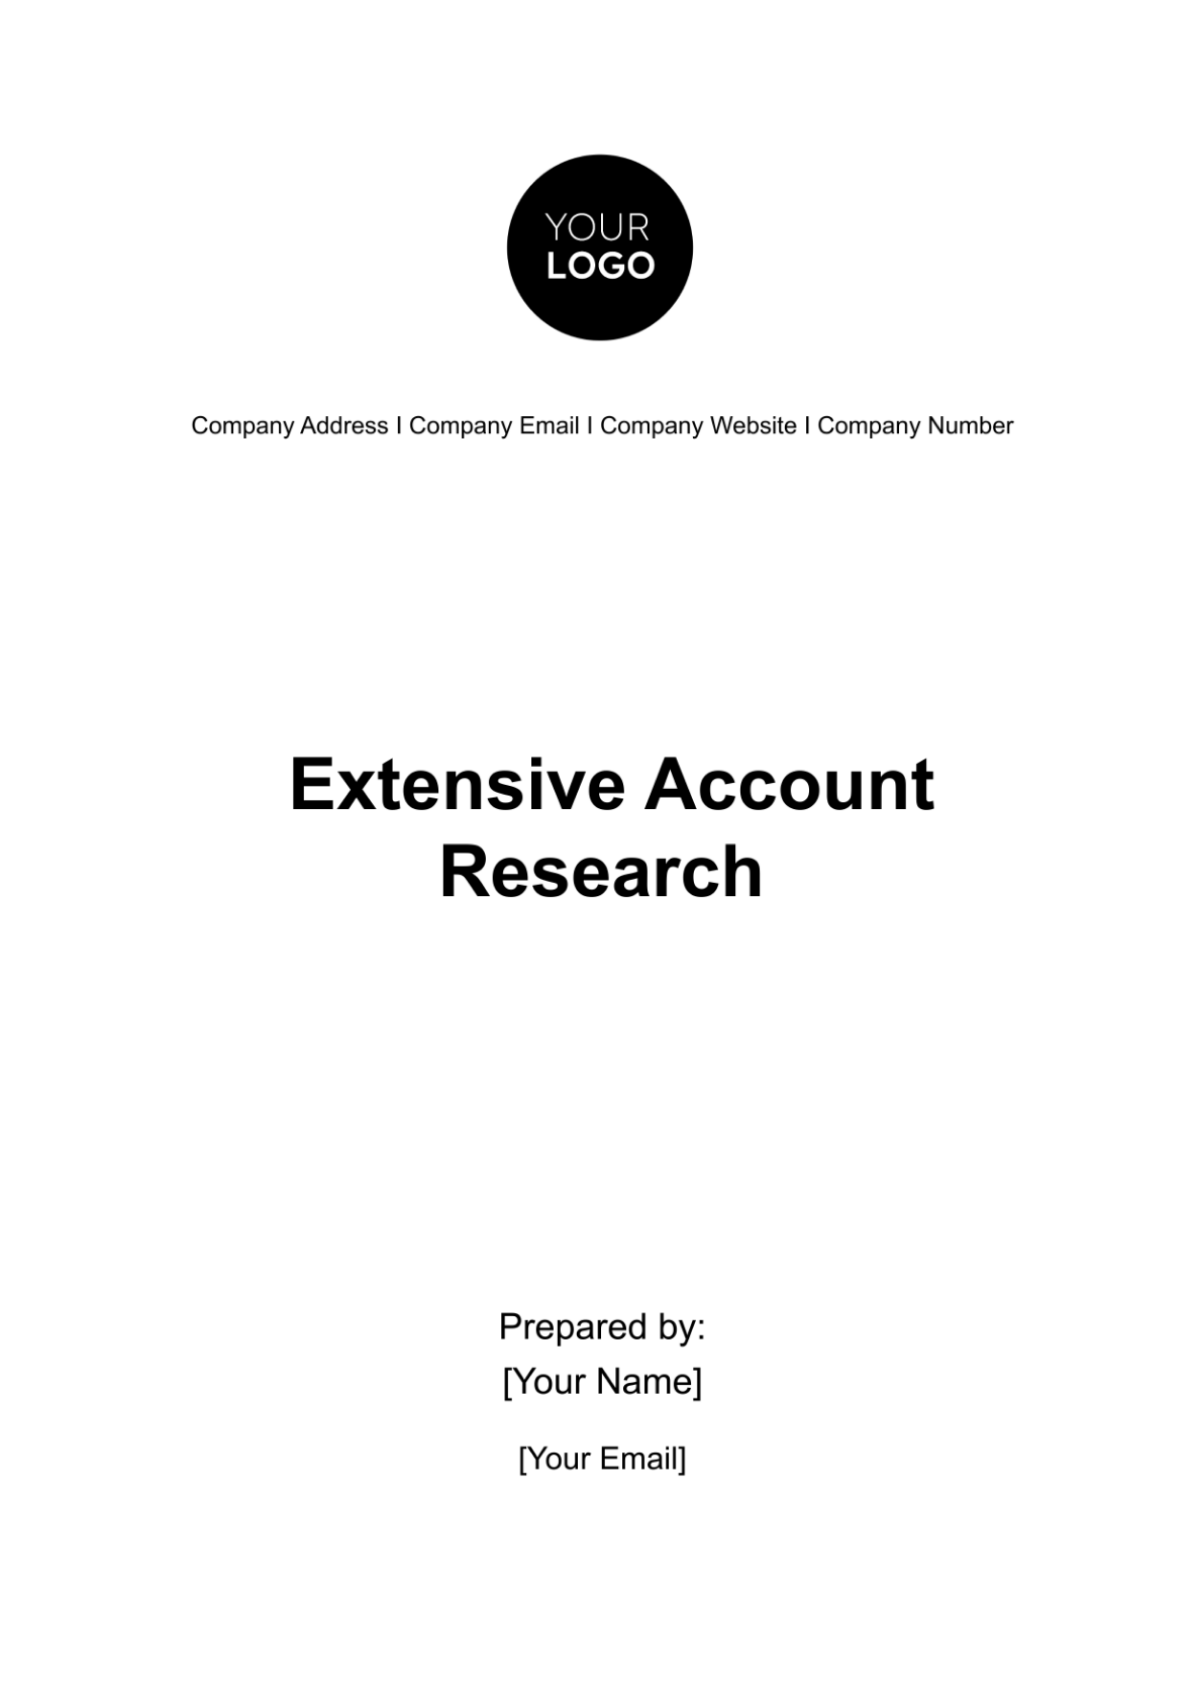 Extensive Account Research Template